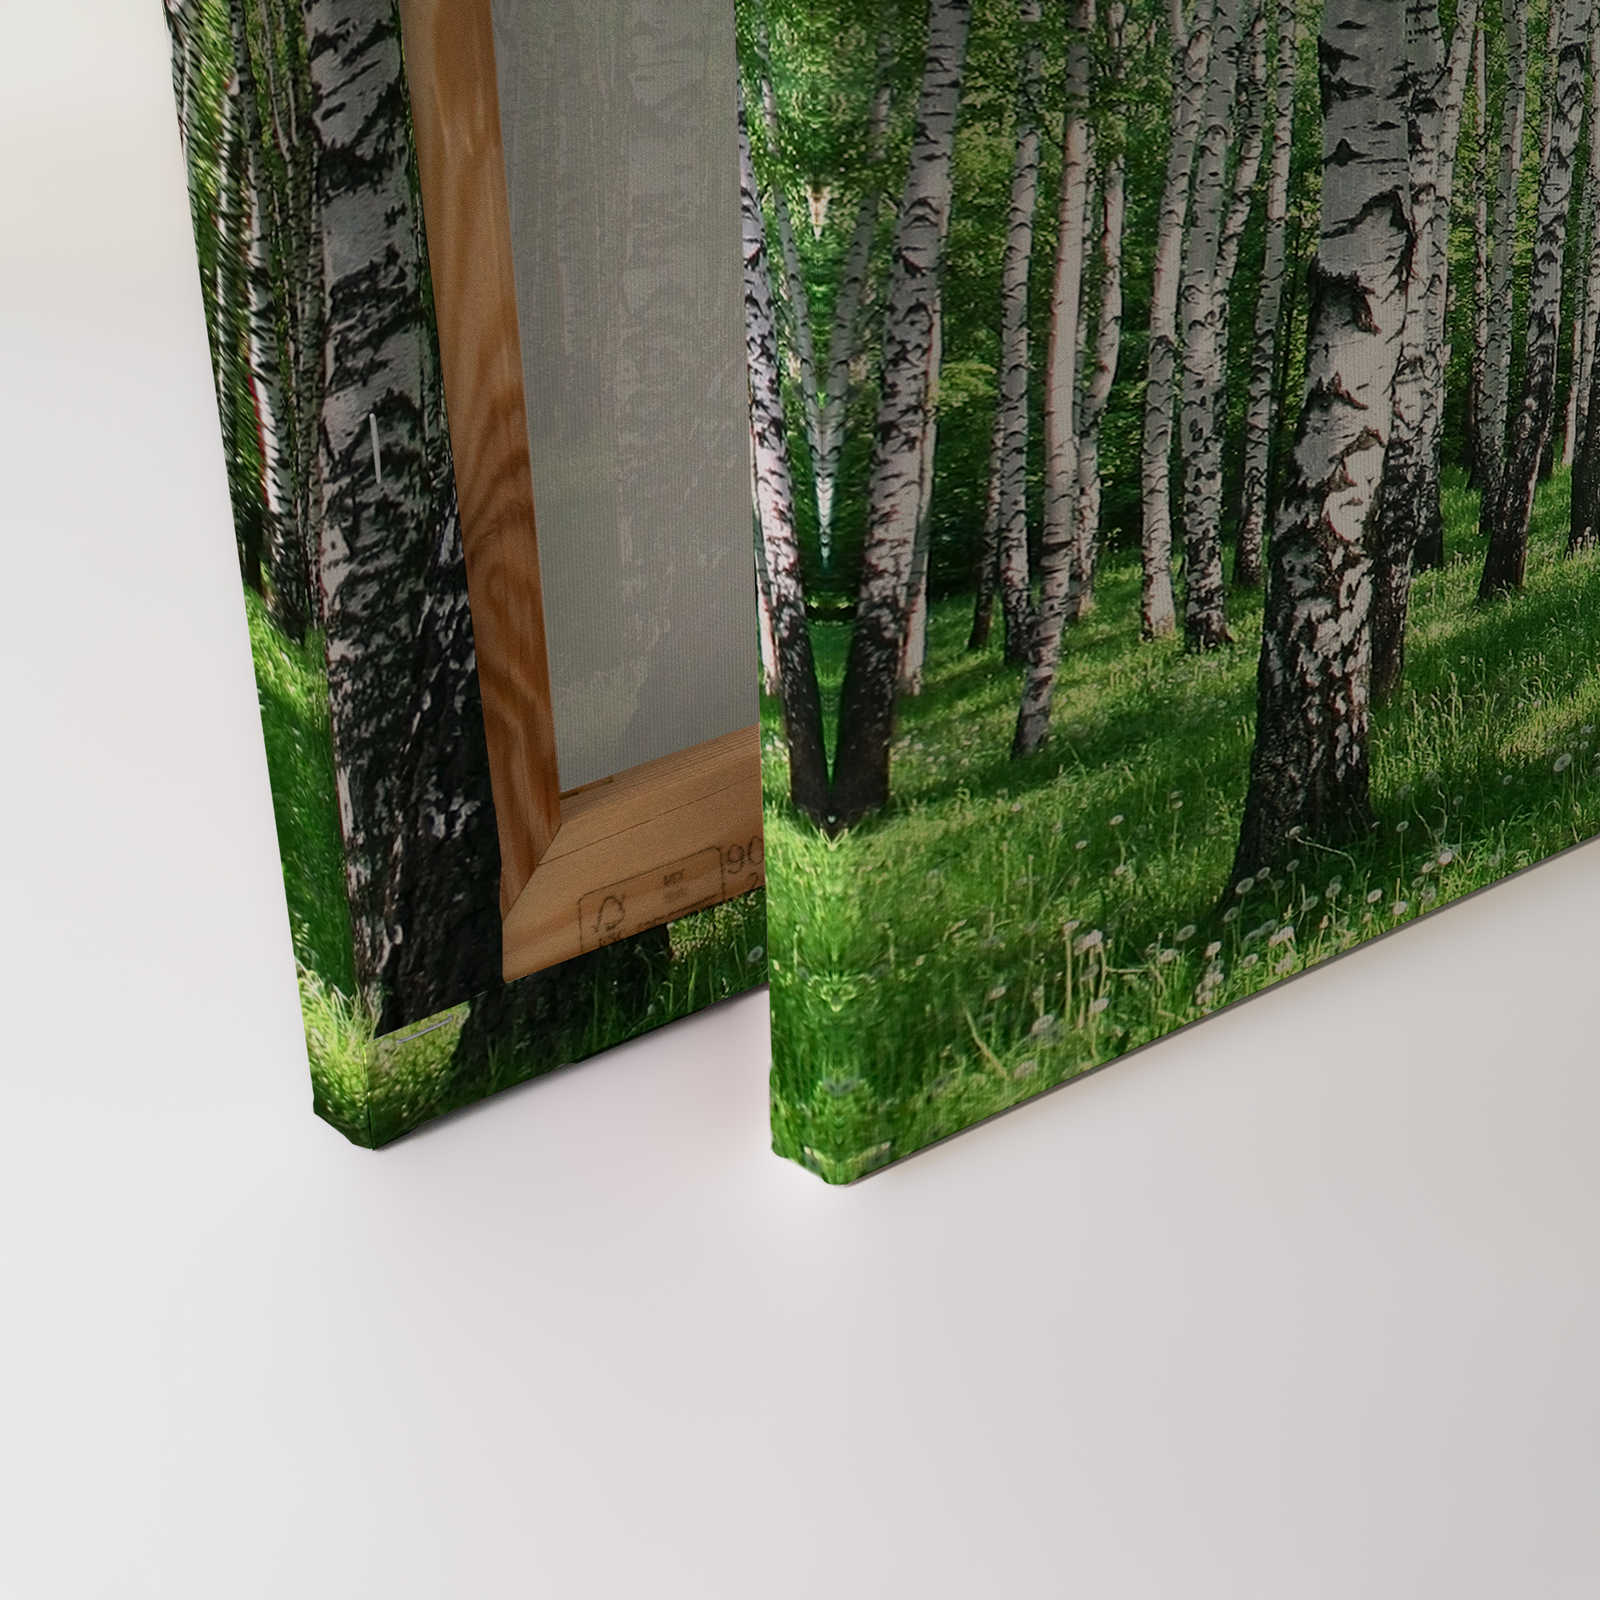             Landscape canvas picture Birch Forest with Meadow - 1,20 m x 0,80 m
        